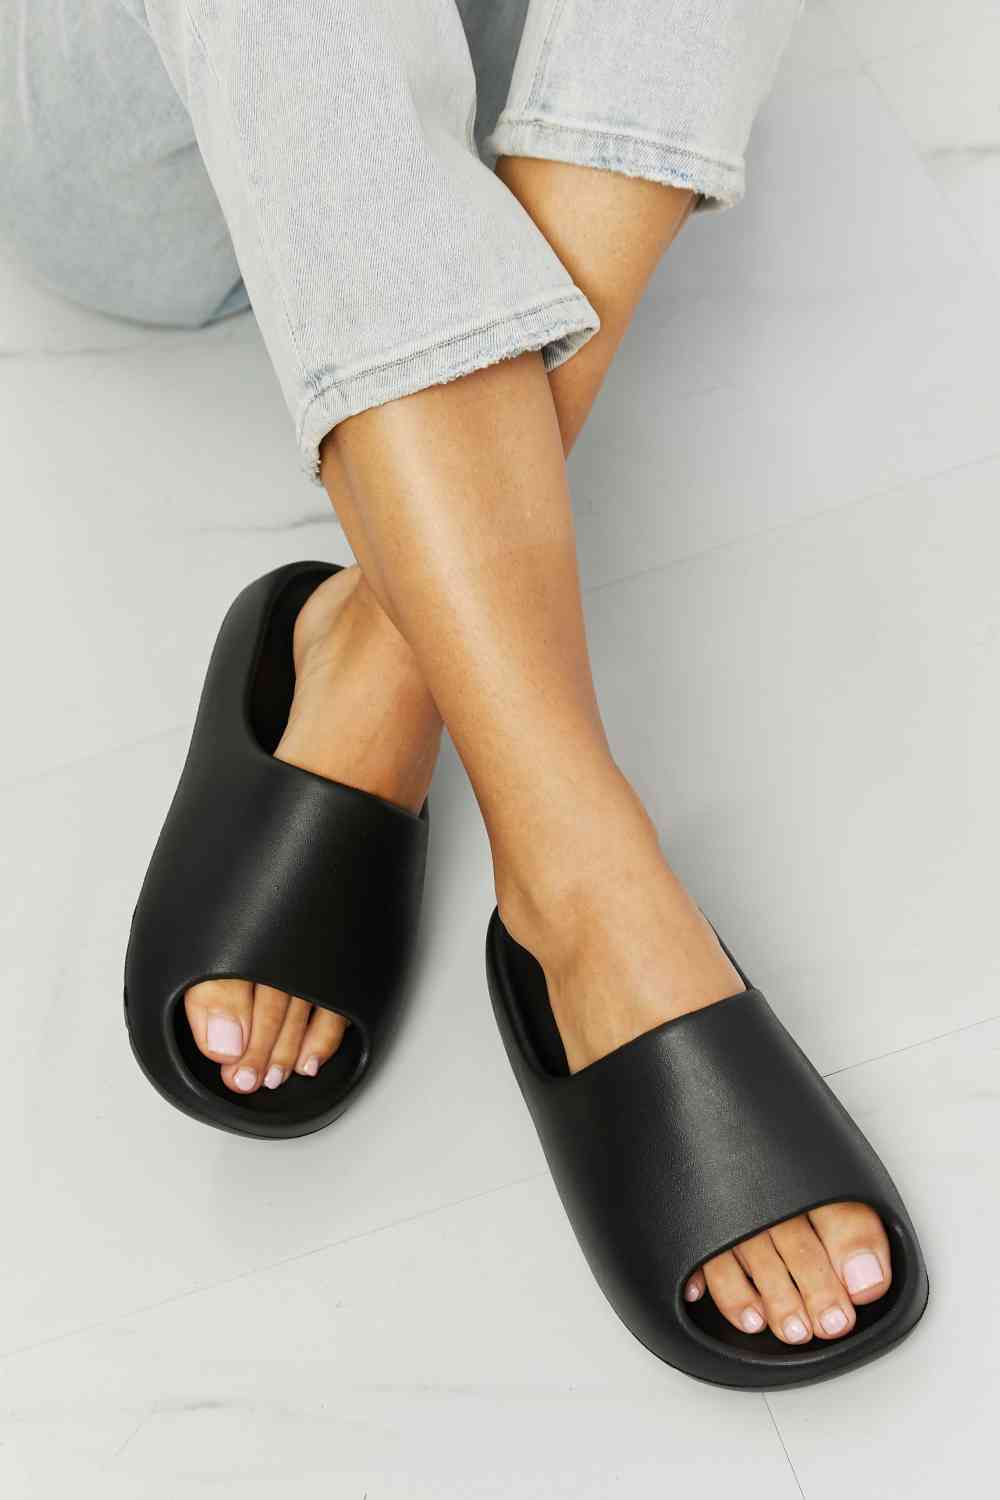 NOOK JOI In My Comfort Zone Slides in Black - Opulence & Essence